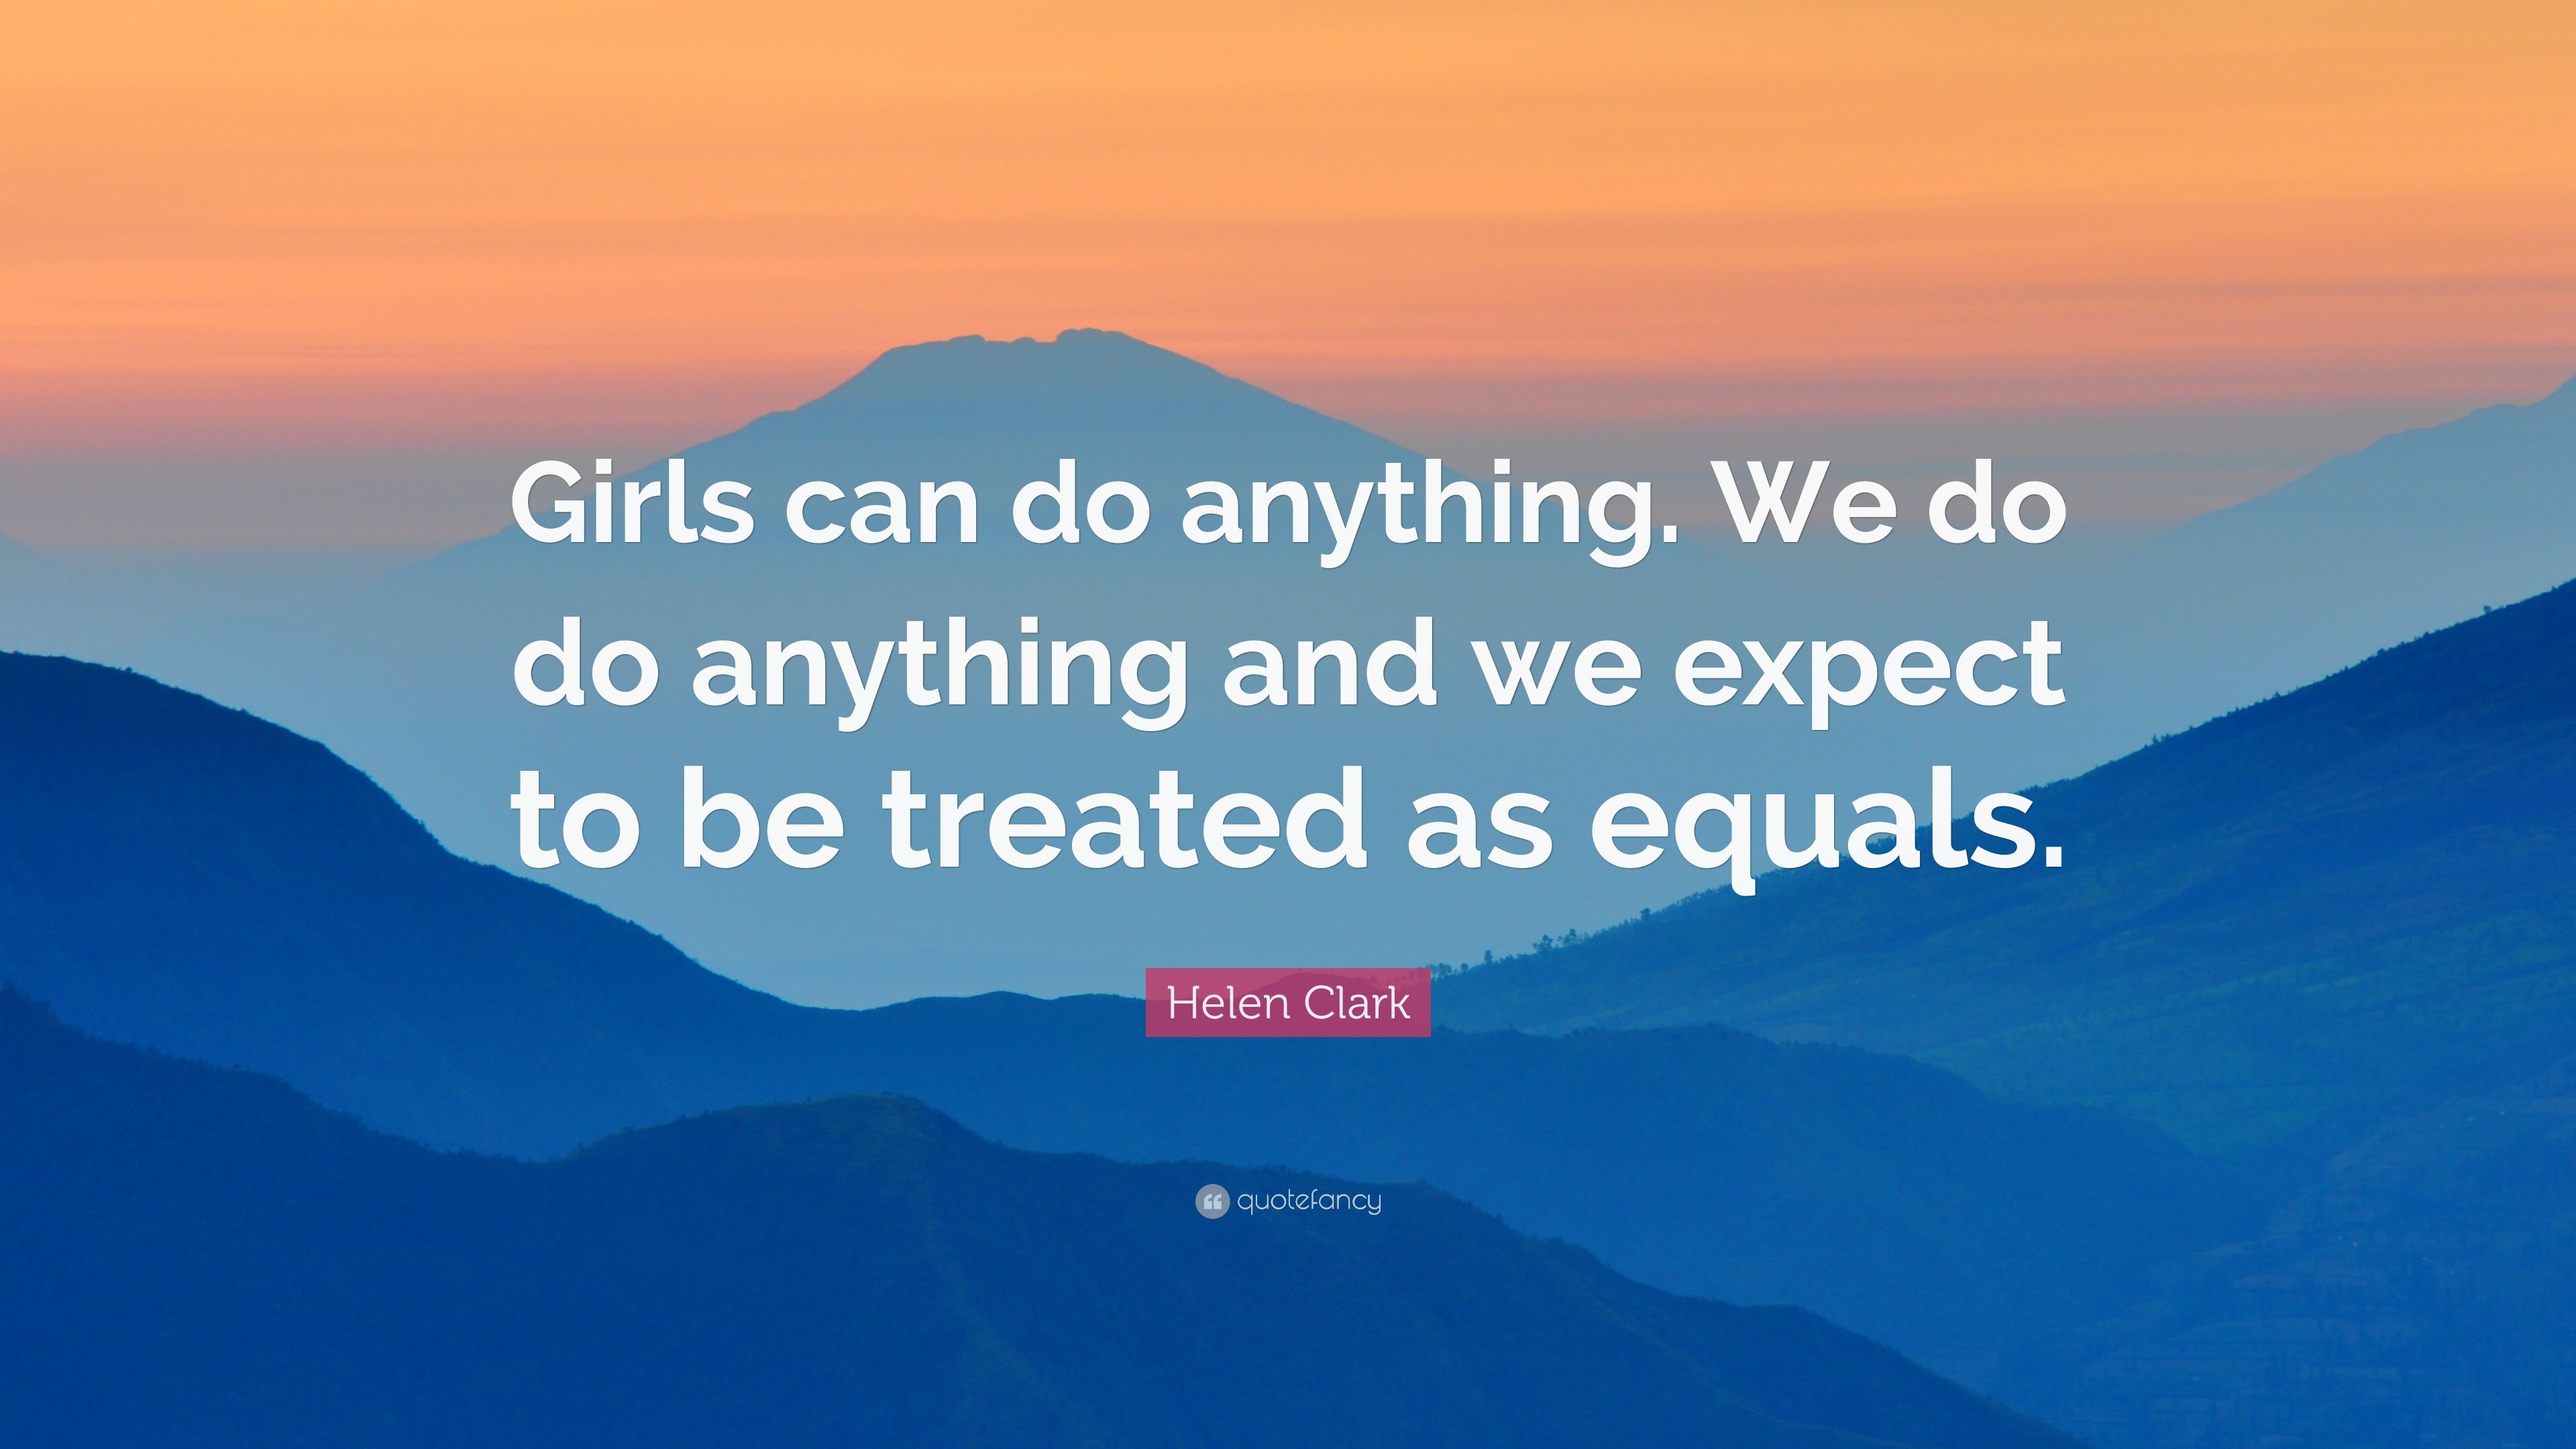 Helen Clark Quote: “Girls can do anything. We do do anything and we expect to be treated as equals.” (7 wallpaper)